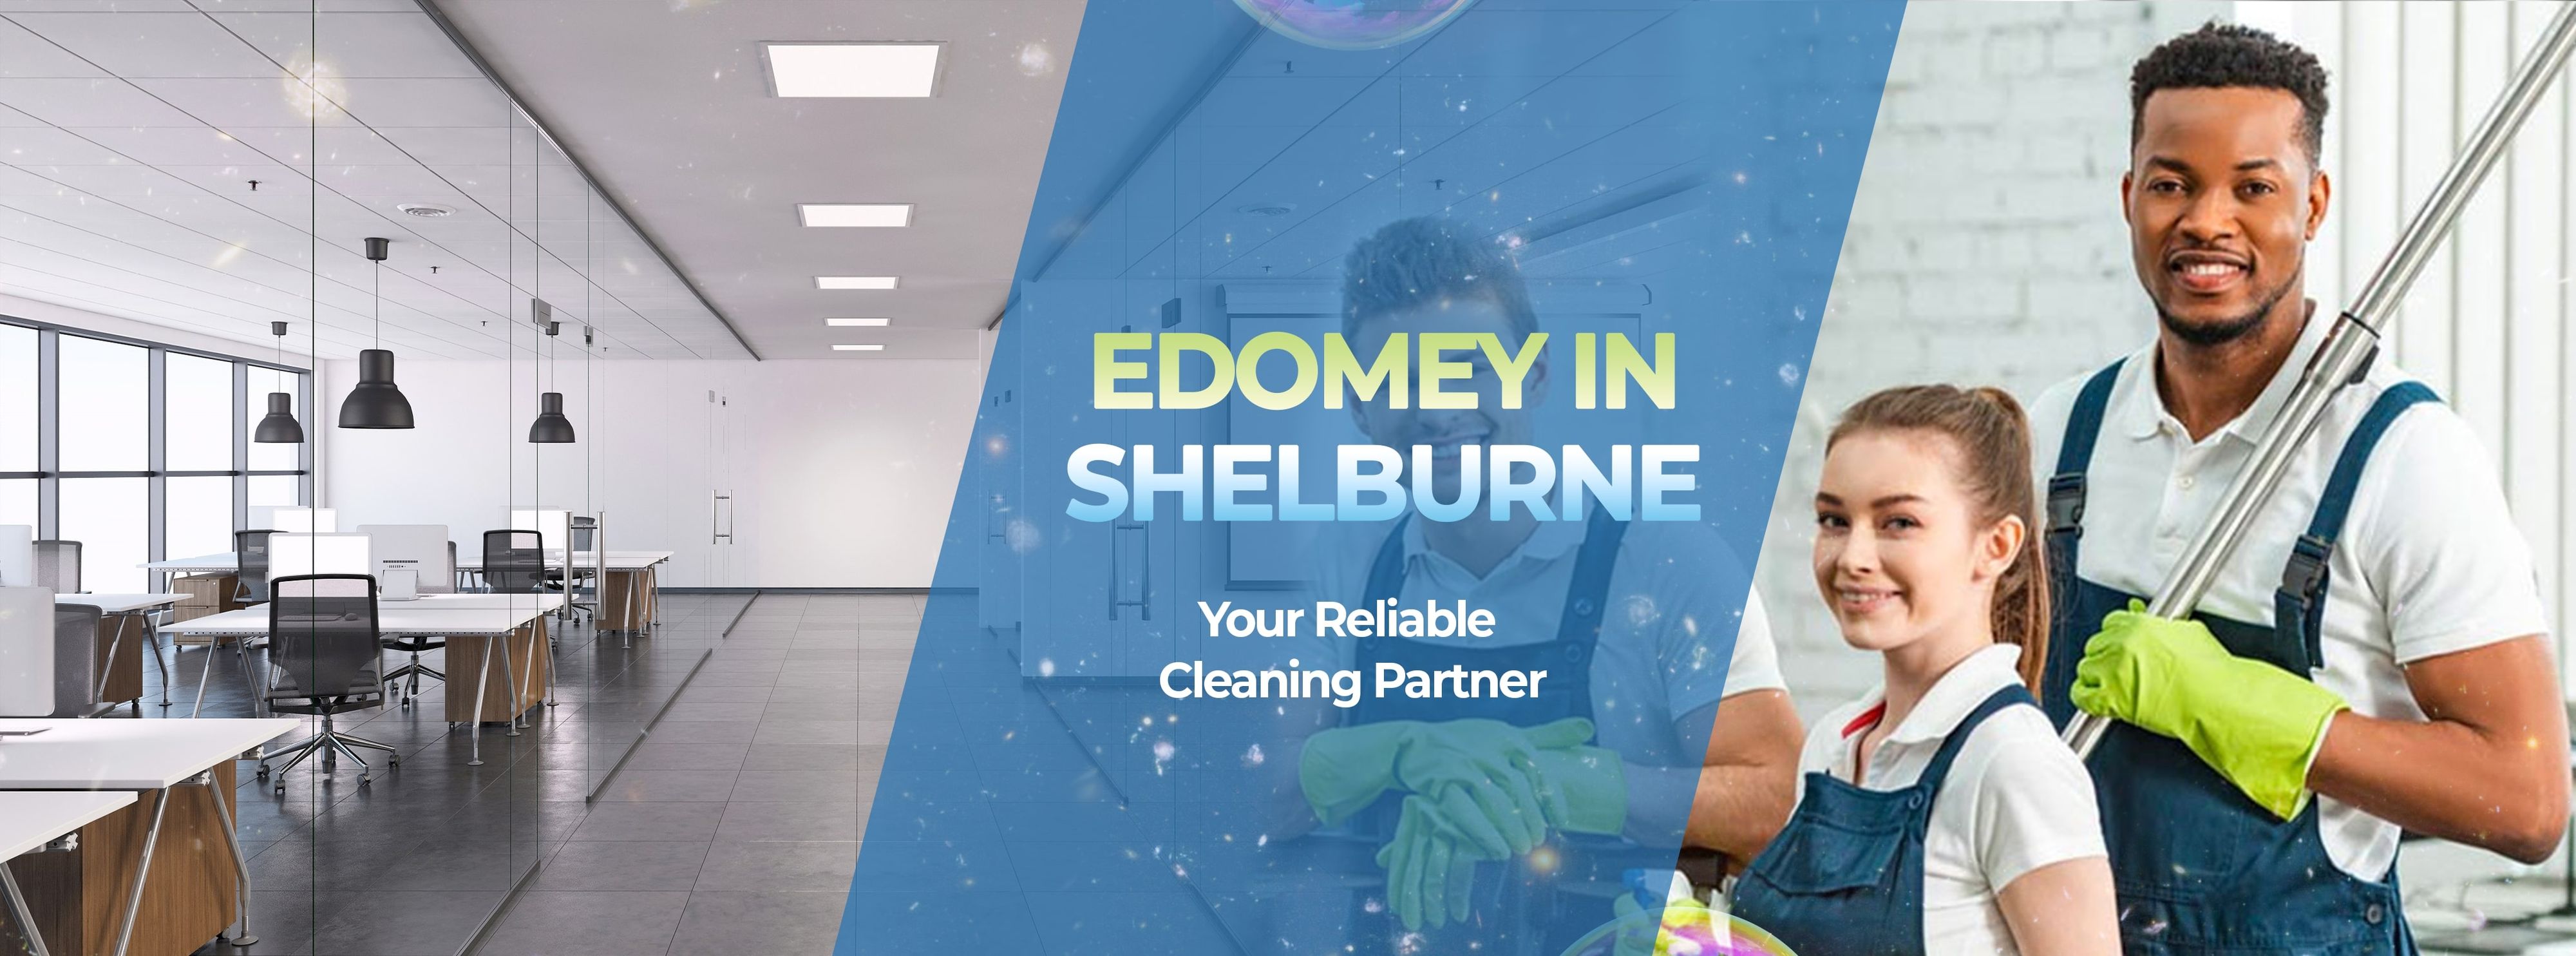 affordable Commercial Cleaning Services in Shelburne